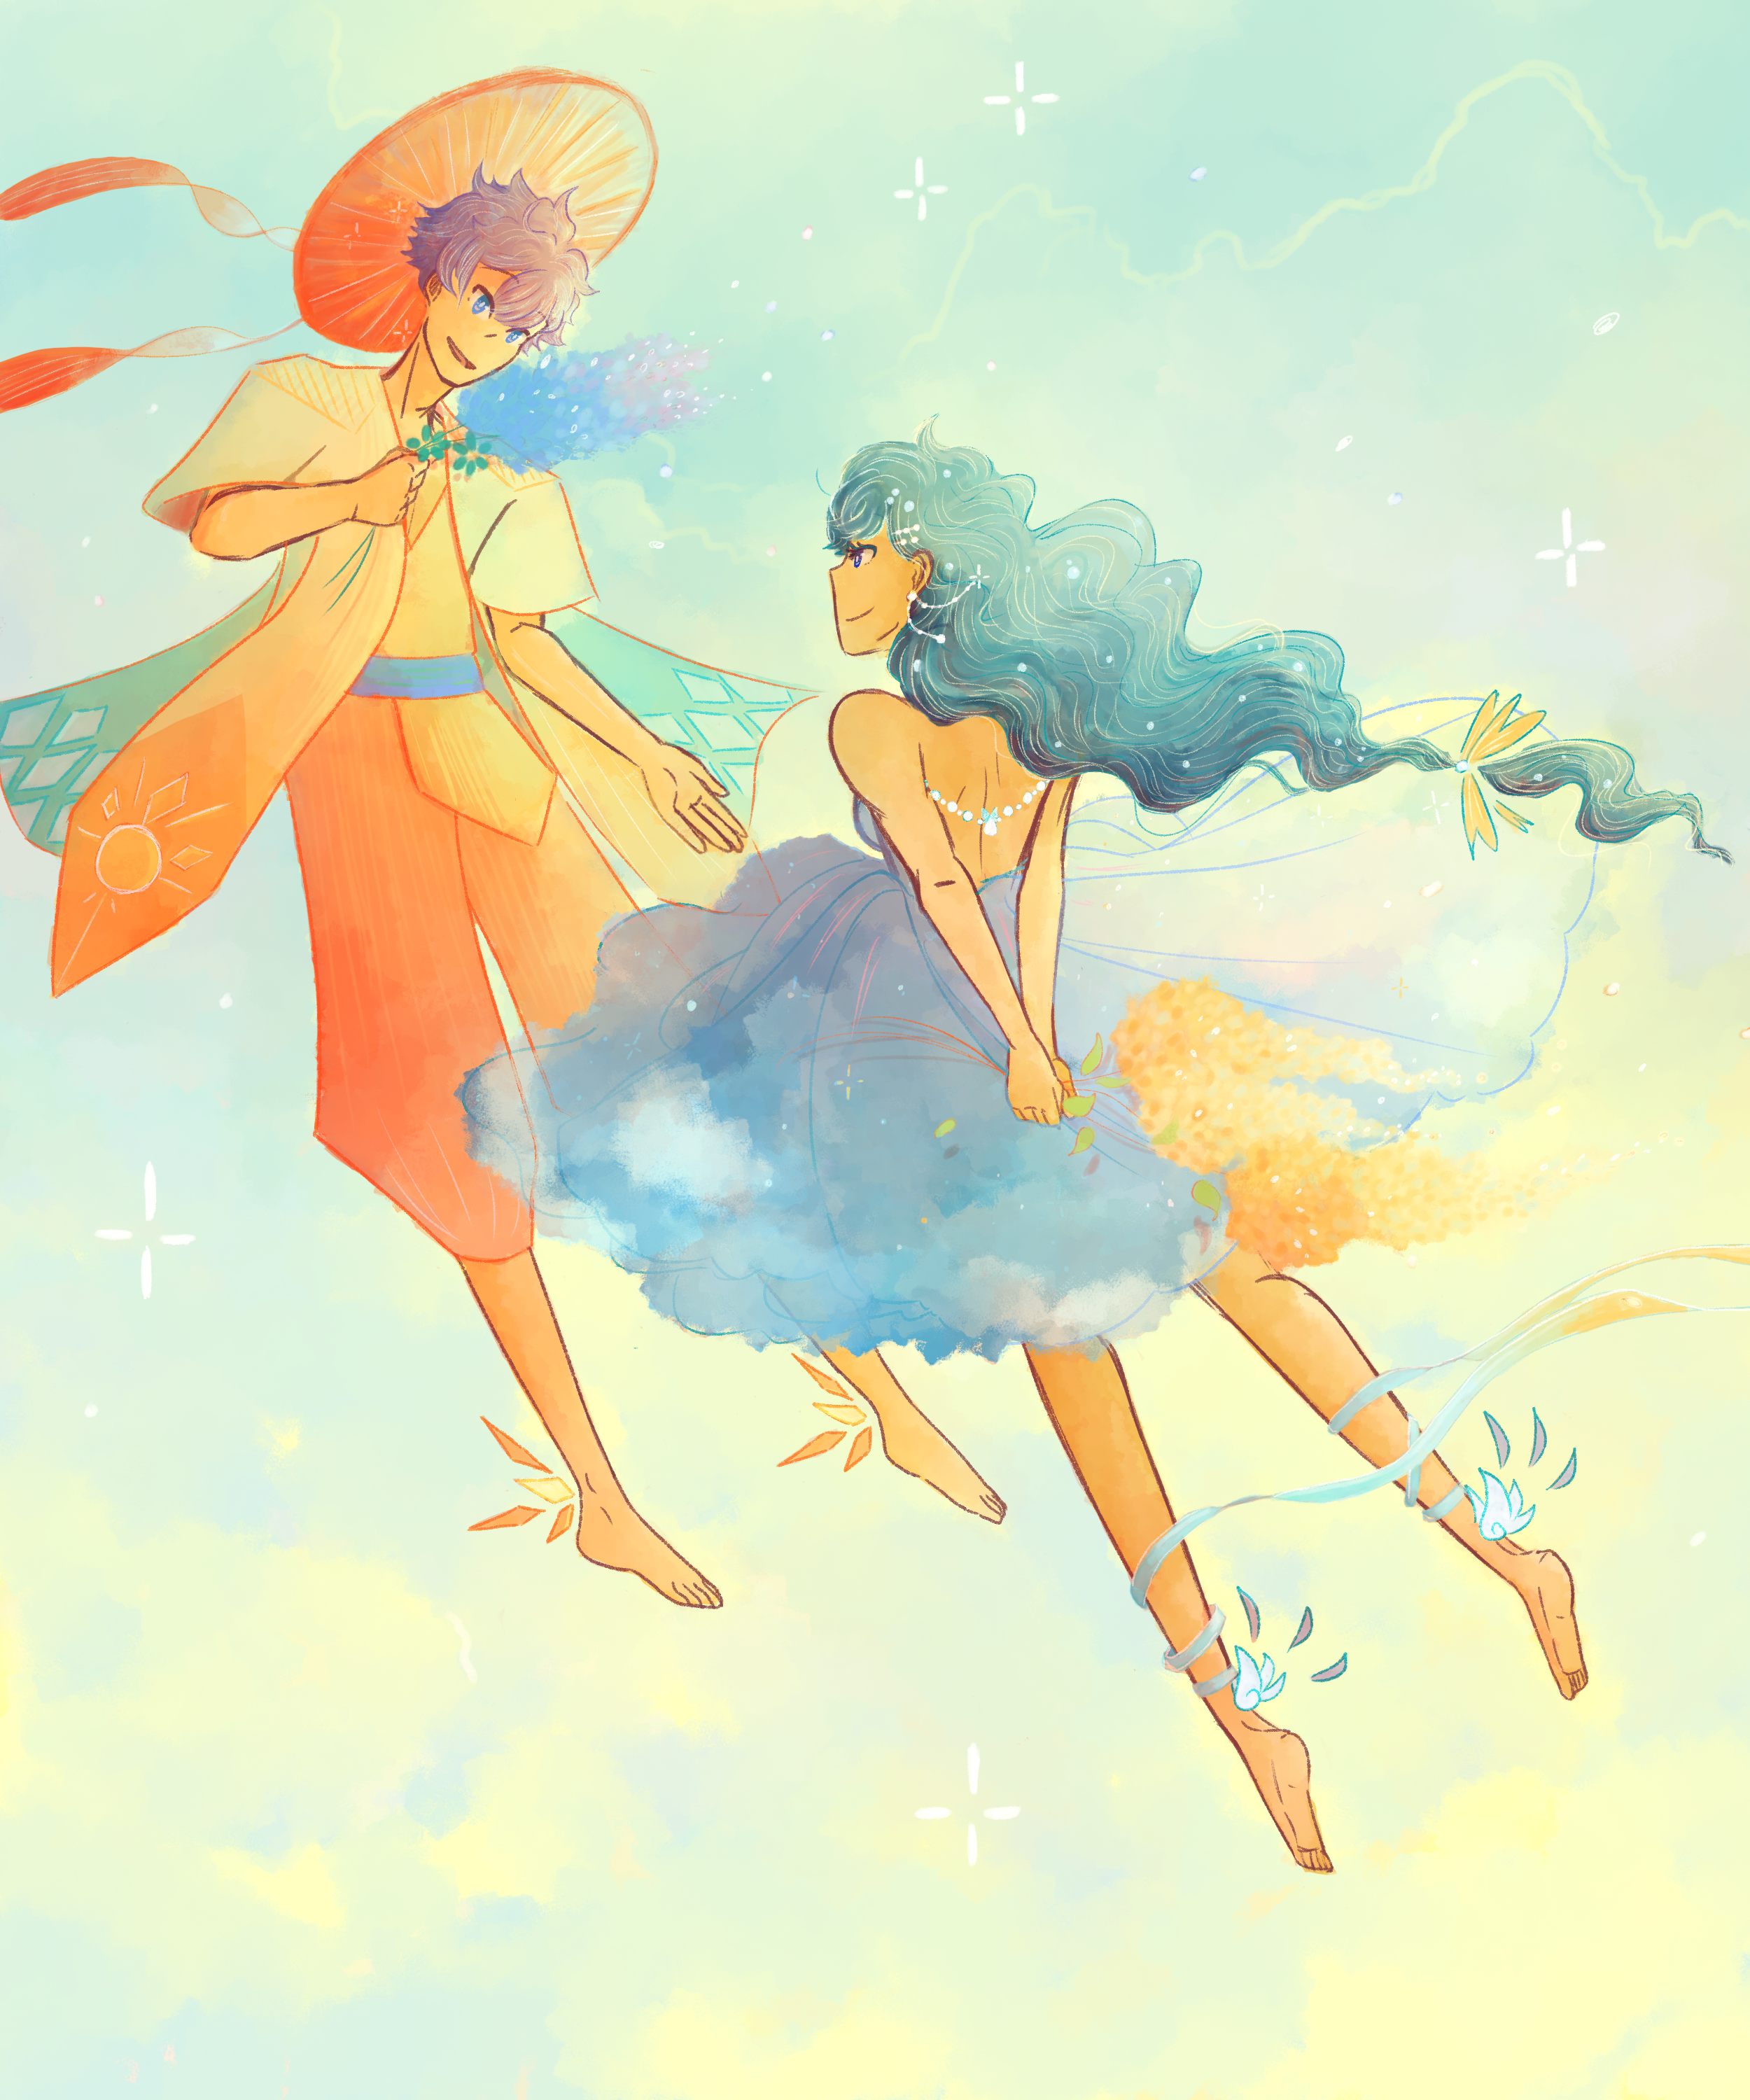 A couple are floating in the sky, a masculine person in orange clothes and a feminine appearing person wearing a flowing blue dress.